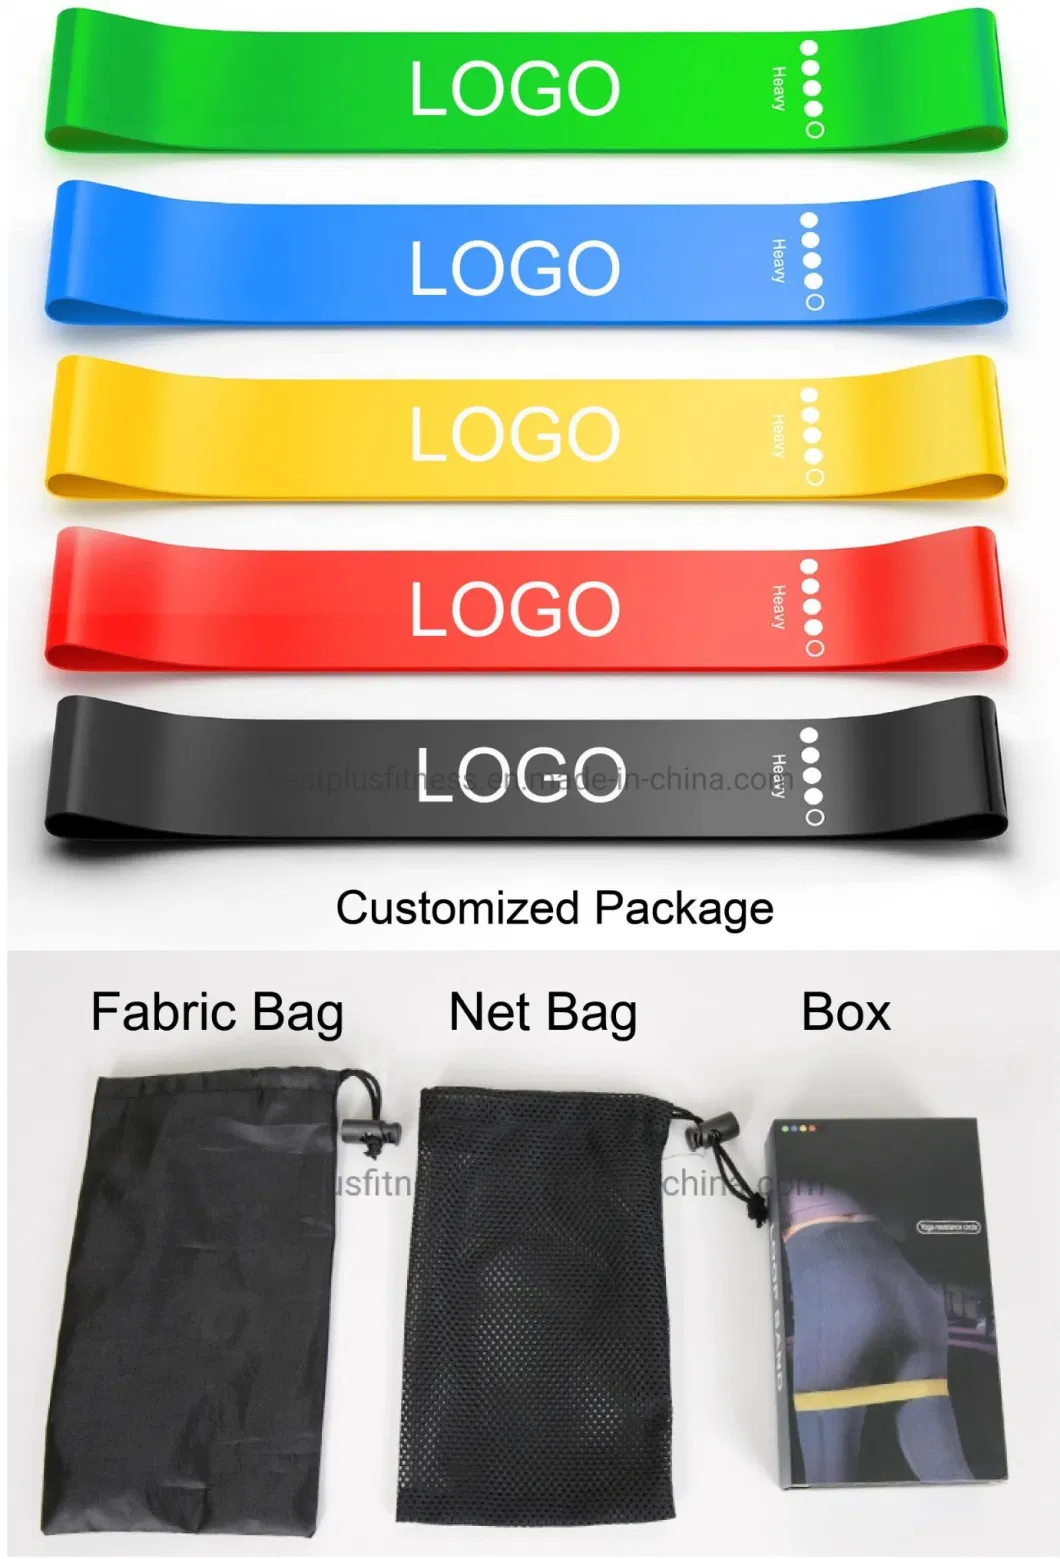 Resistance Fitness Exercise Loop Bands with 5 Different Resistance Levels - Free Stylish Carrying Case Included - Ideal for Home Gym Yoga Workouts Training